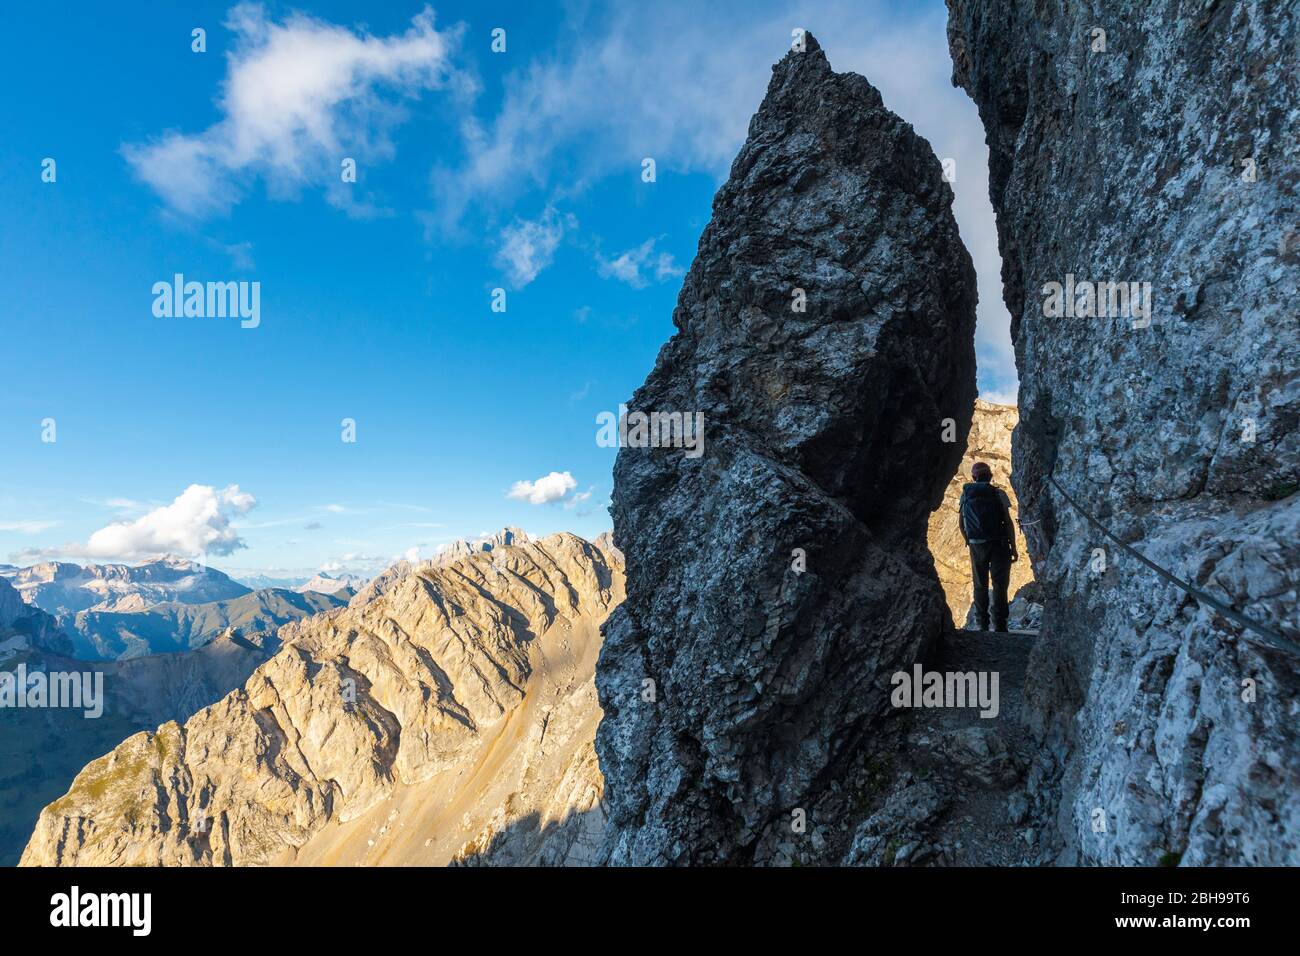 A hiker at the narrowest point of the Bepi Zac High Trail, Costabella Ridge, Marmolada group, Dolomites, Fassa Valley, Trento province, Trentino-Alto Adige, Italy Stock Photo